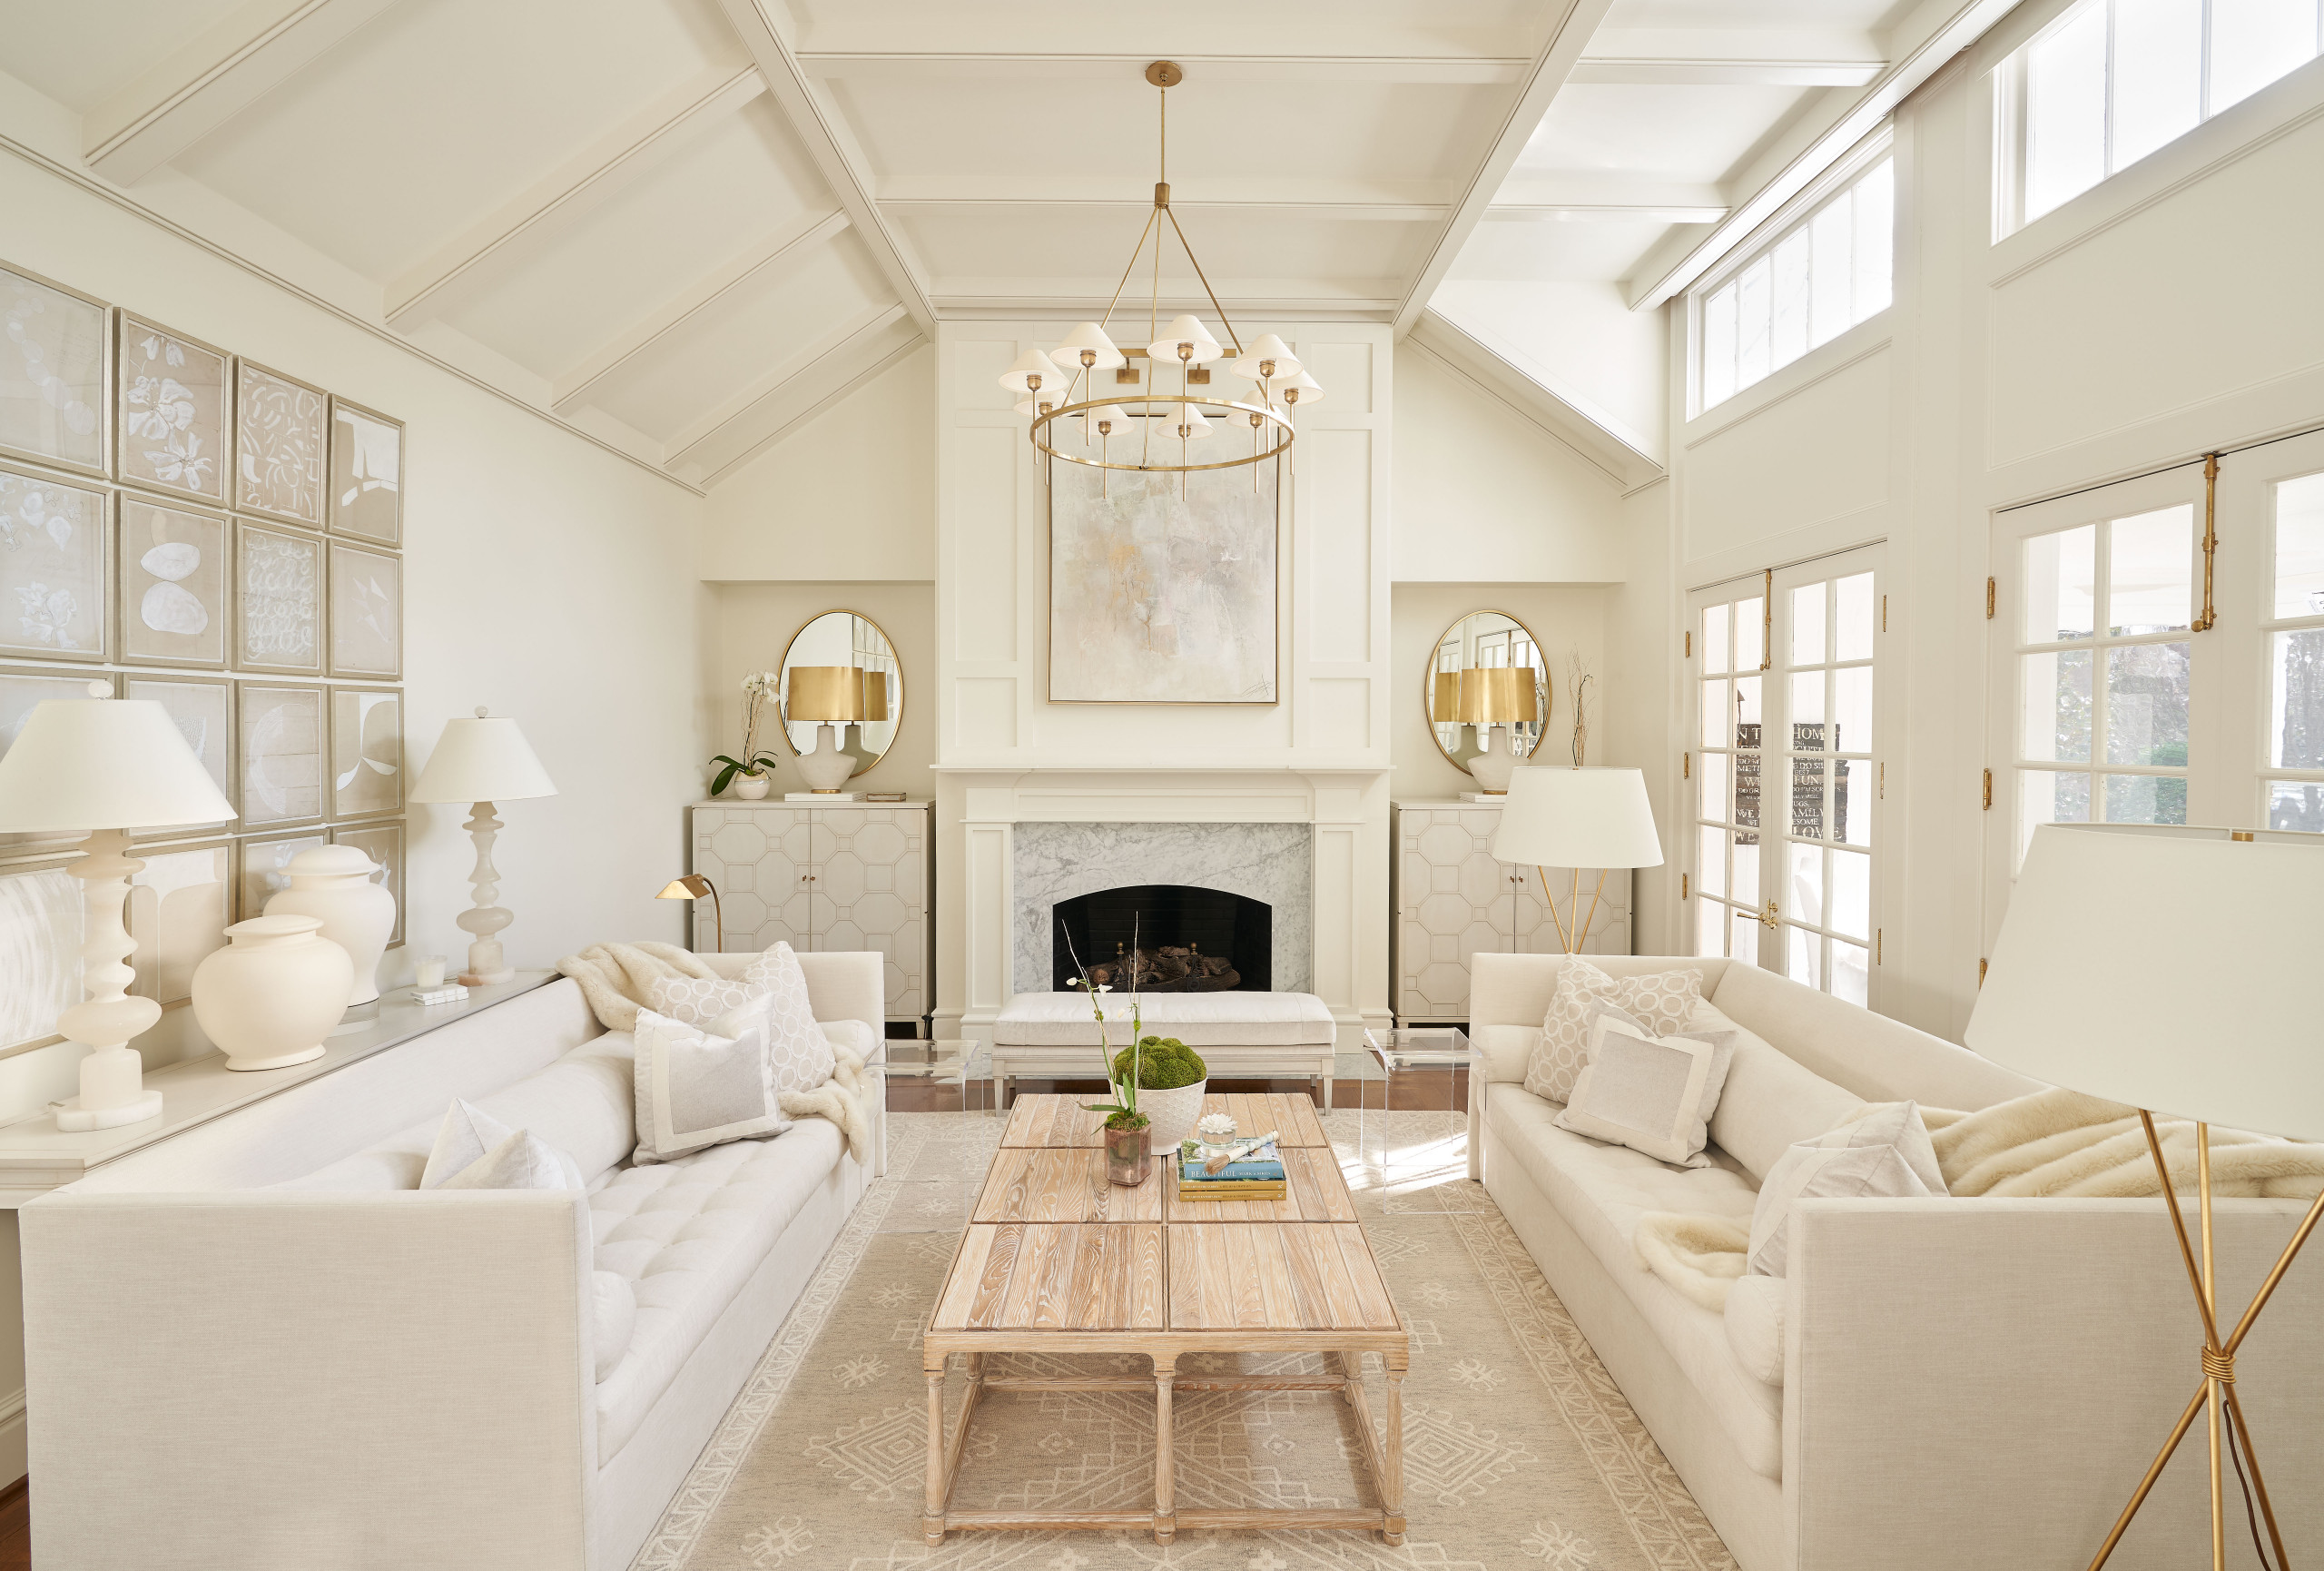 75 Shabby-Chic Style Home Design | Houzz Ideas You'll Love - March, 2023 |  Houzz